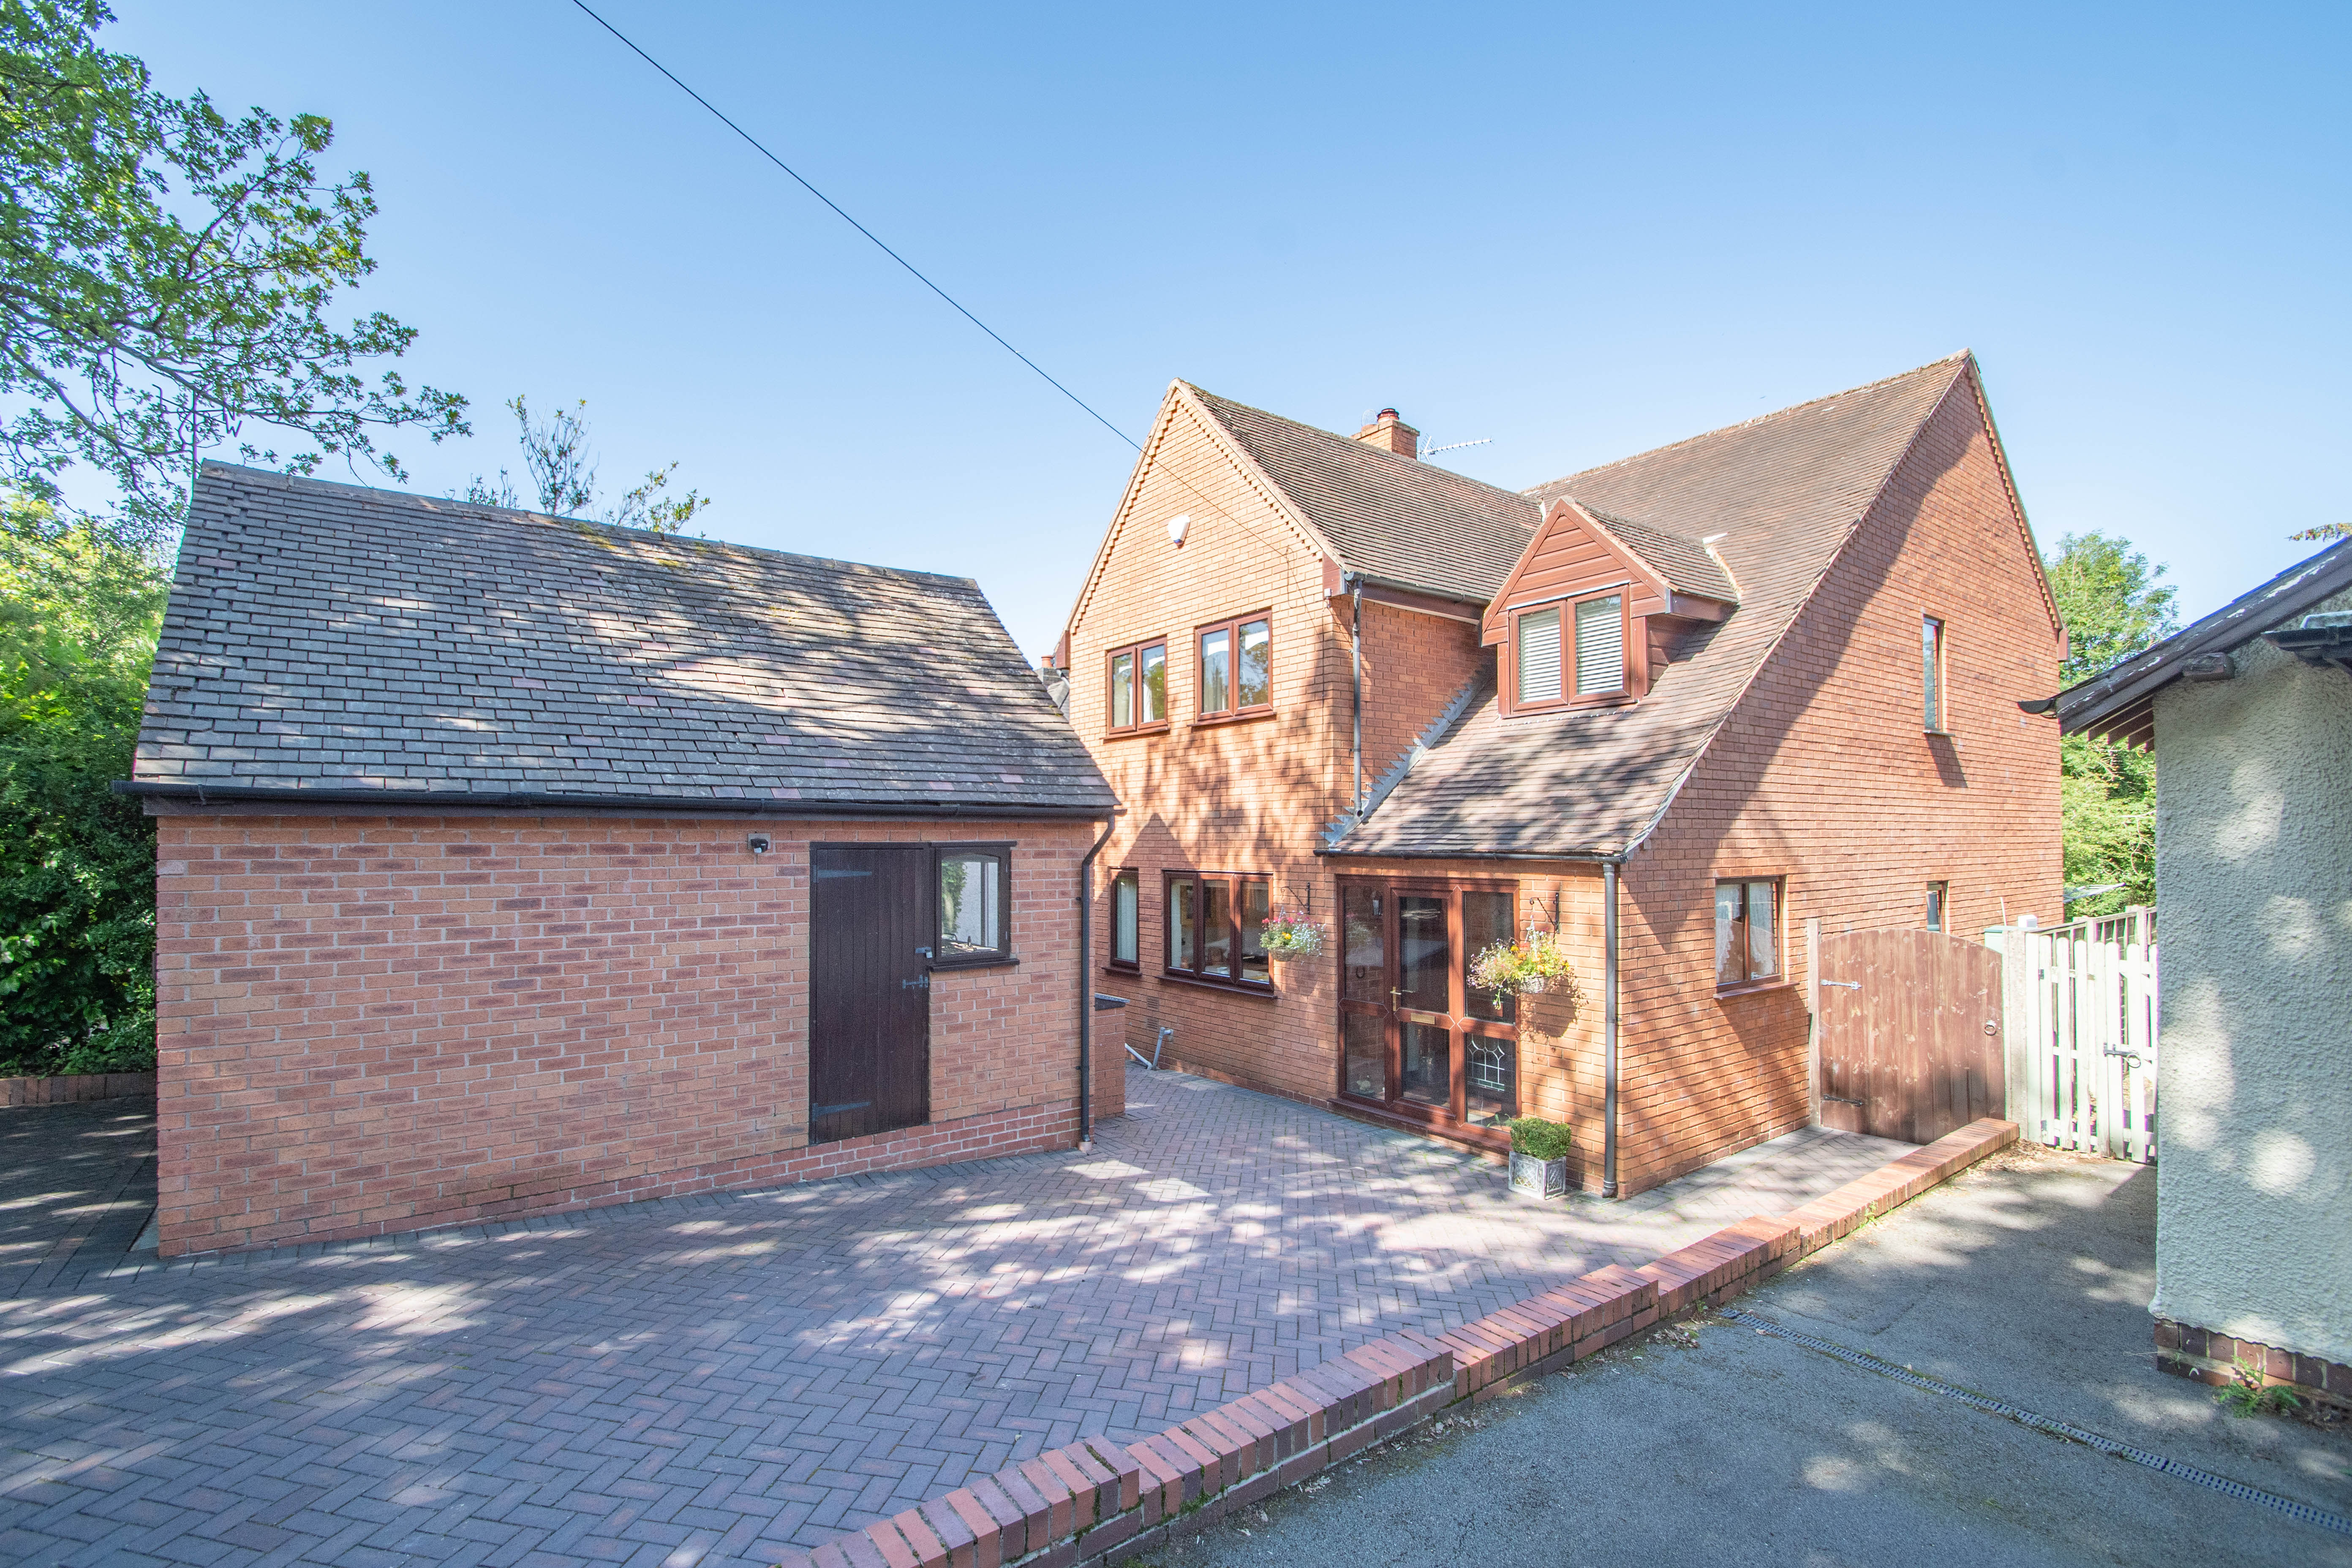 4 bed house for sale in Crumpfields Lane, Webheath 29